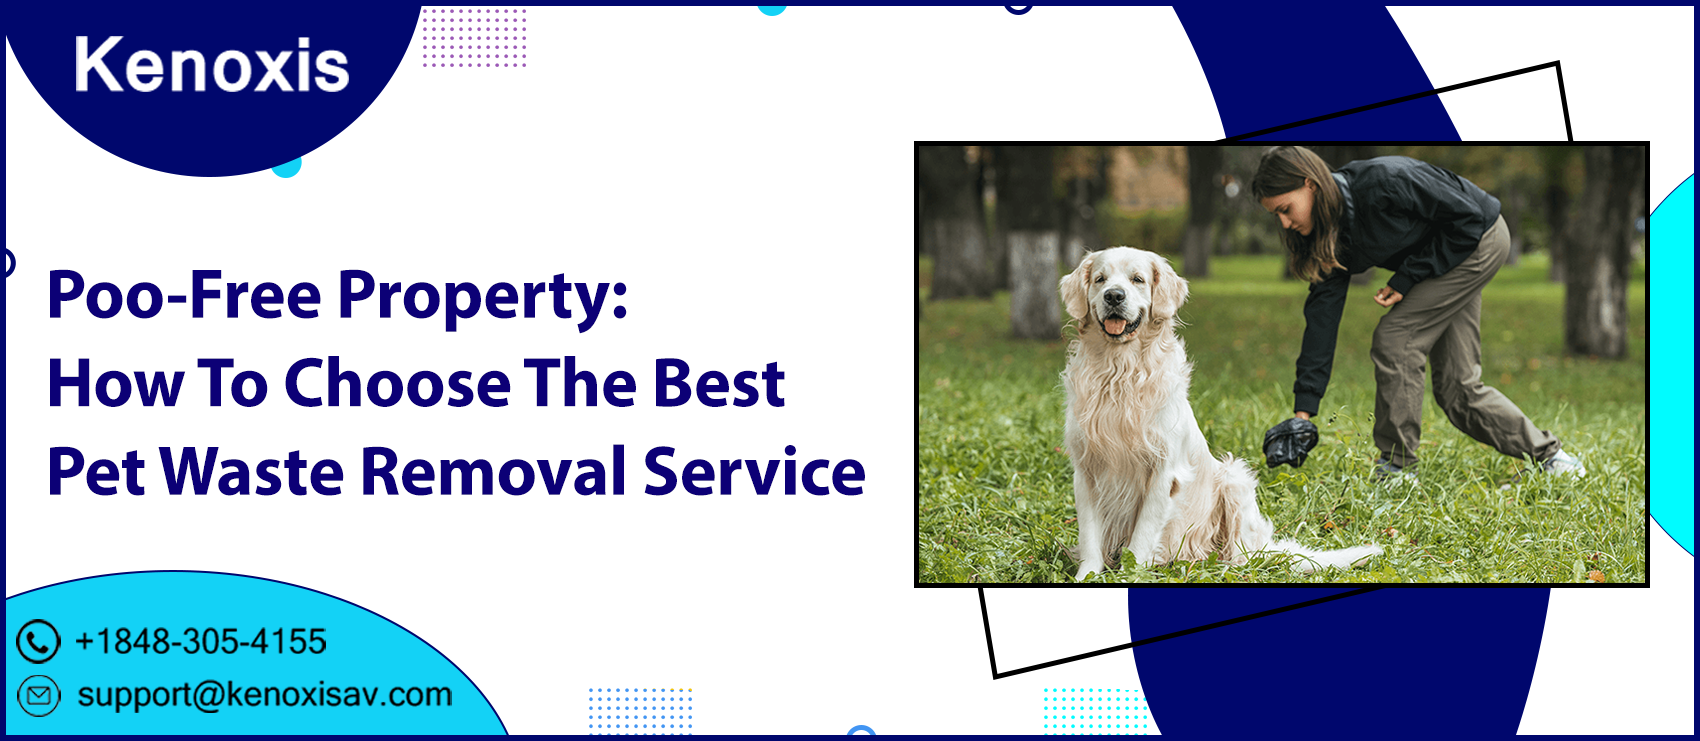 Poo-Free Property: How To Choose The Best Pet Waste Removal Service